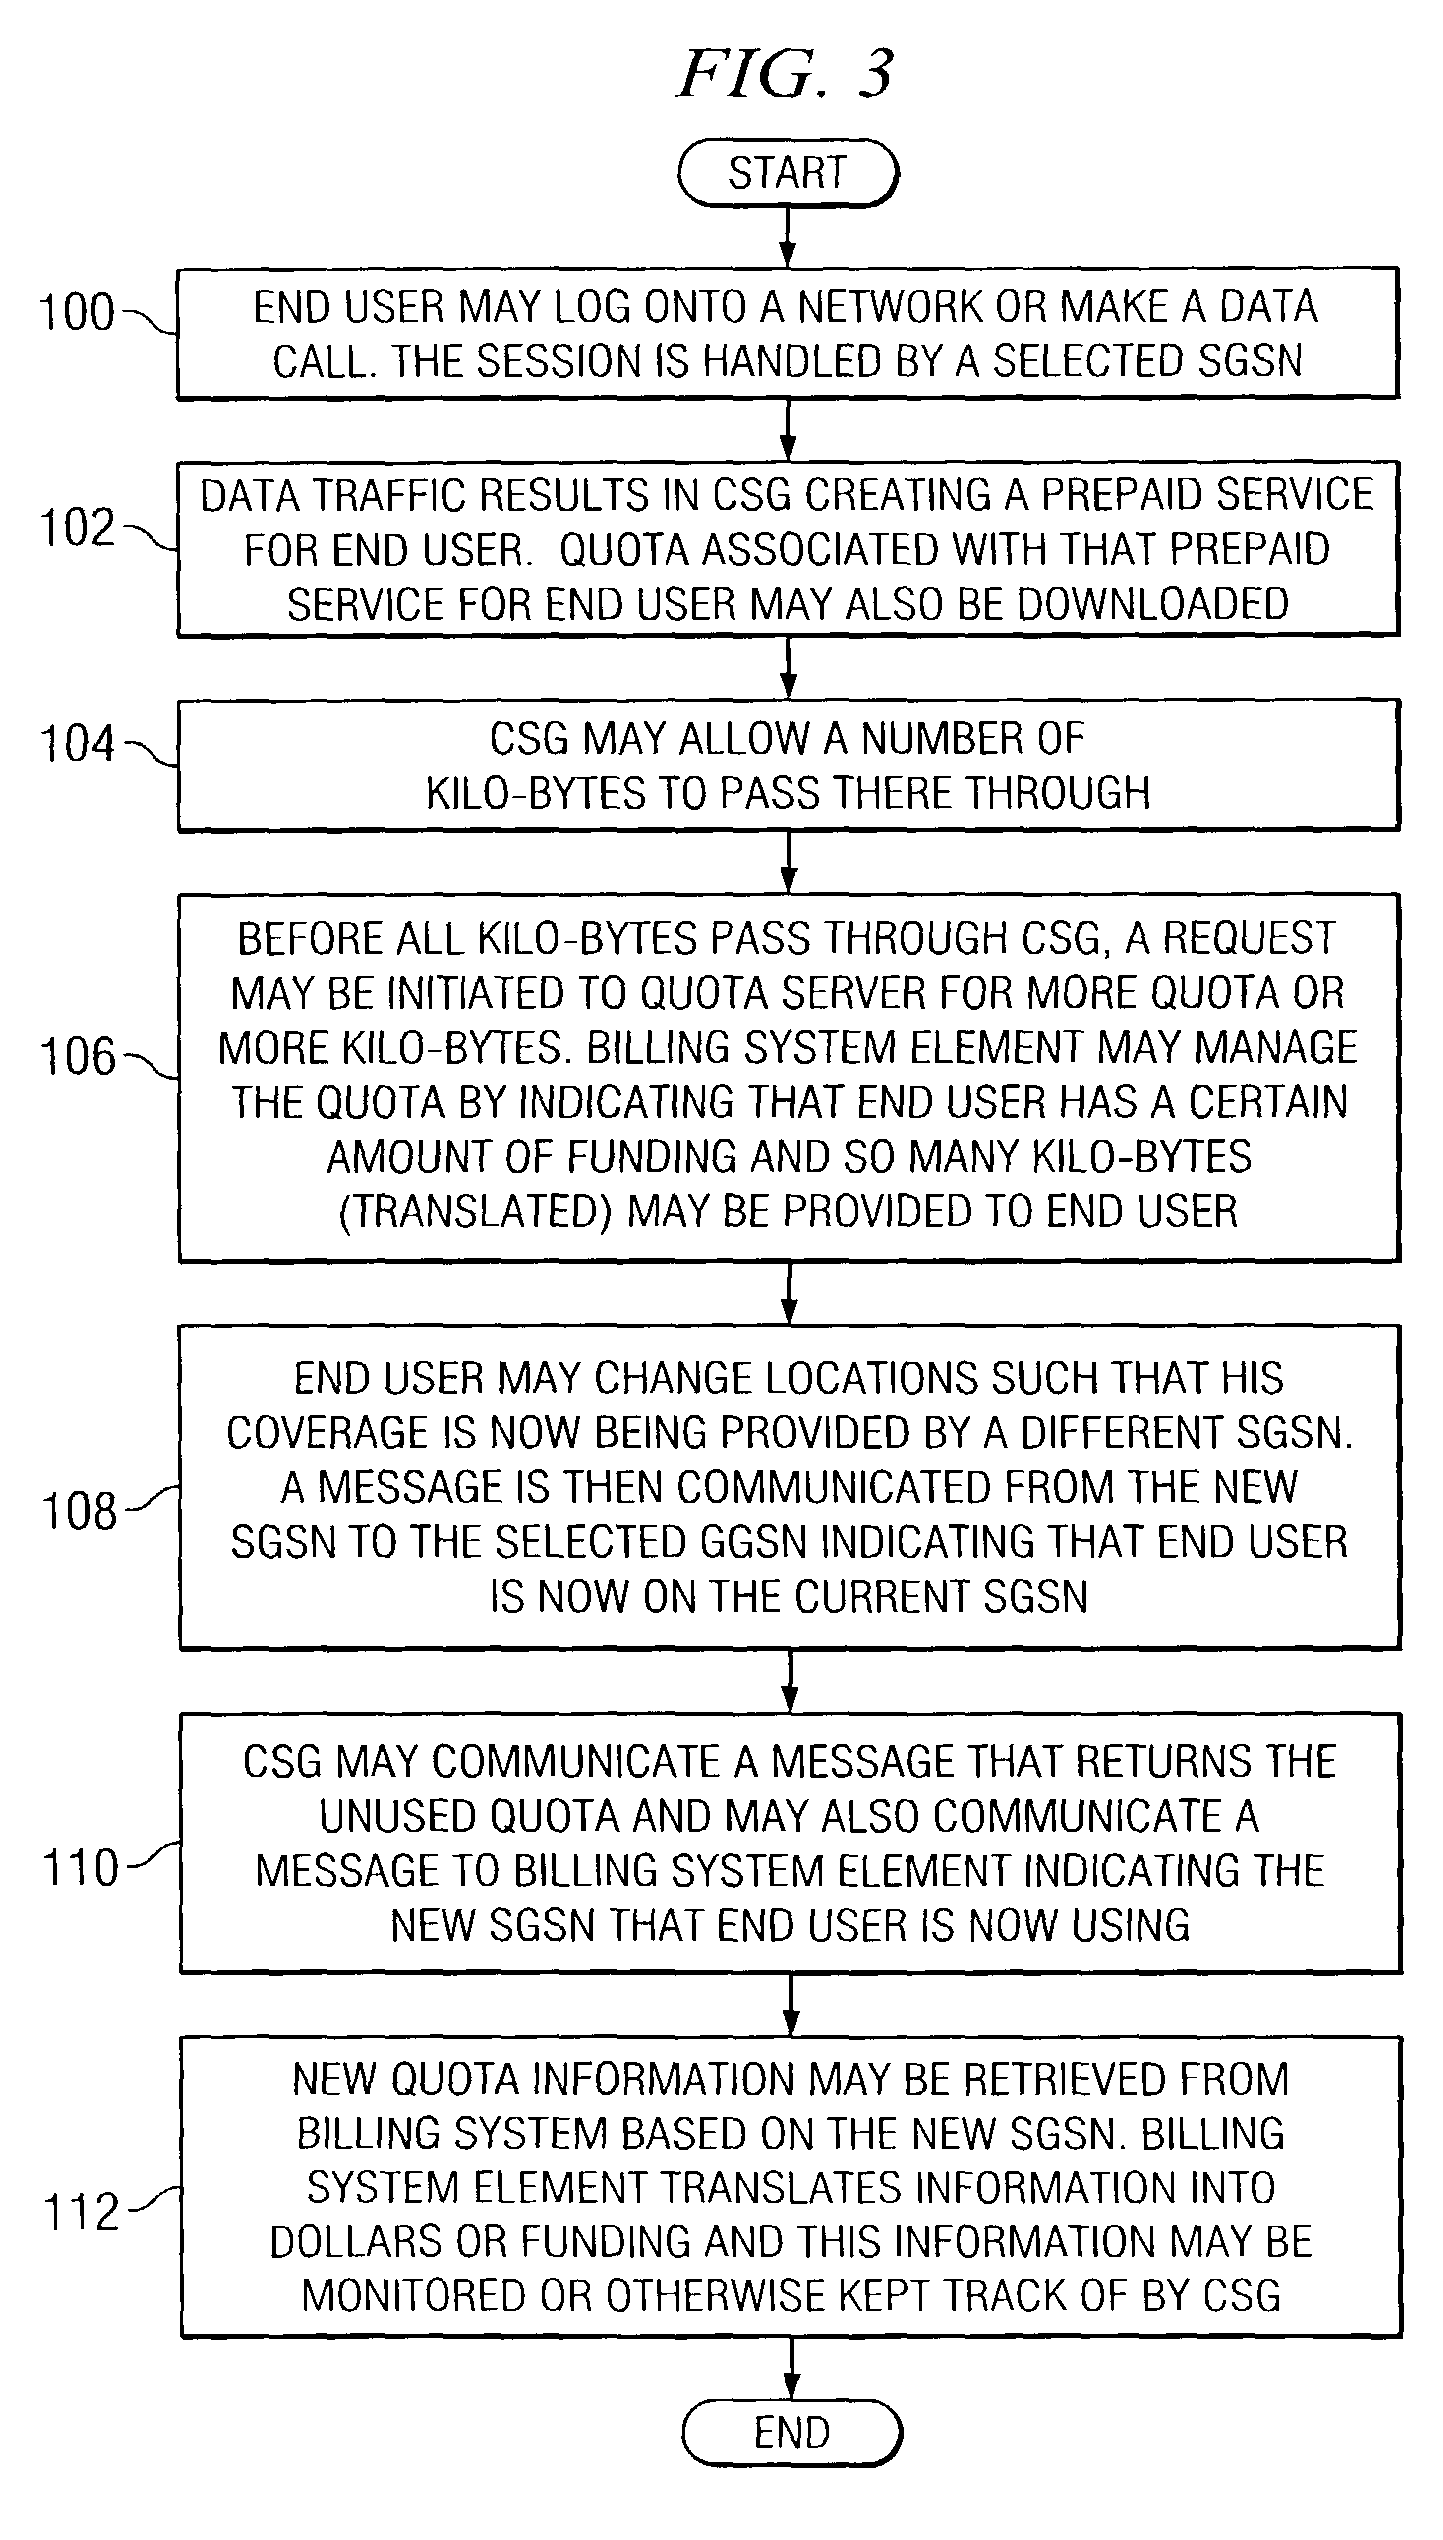 System and method for managing network access for an end user